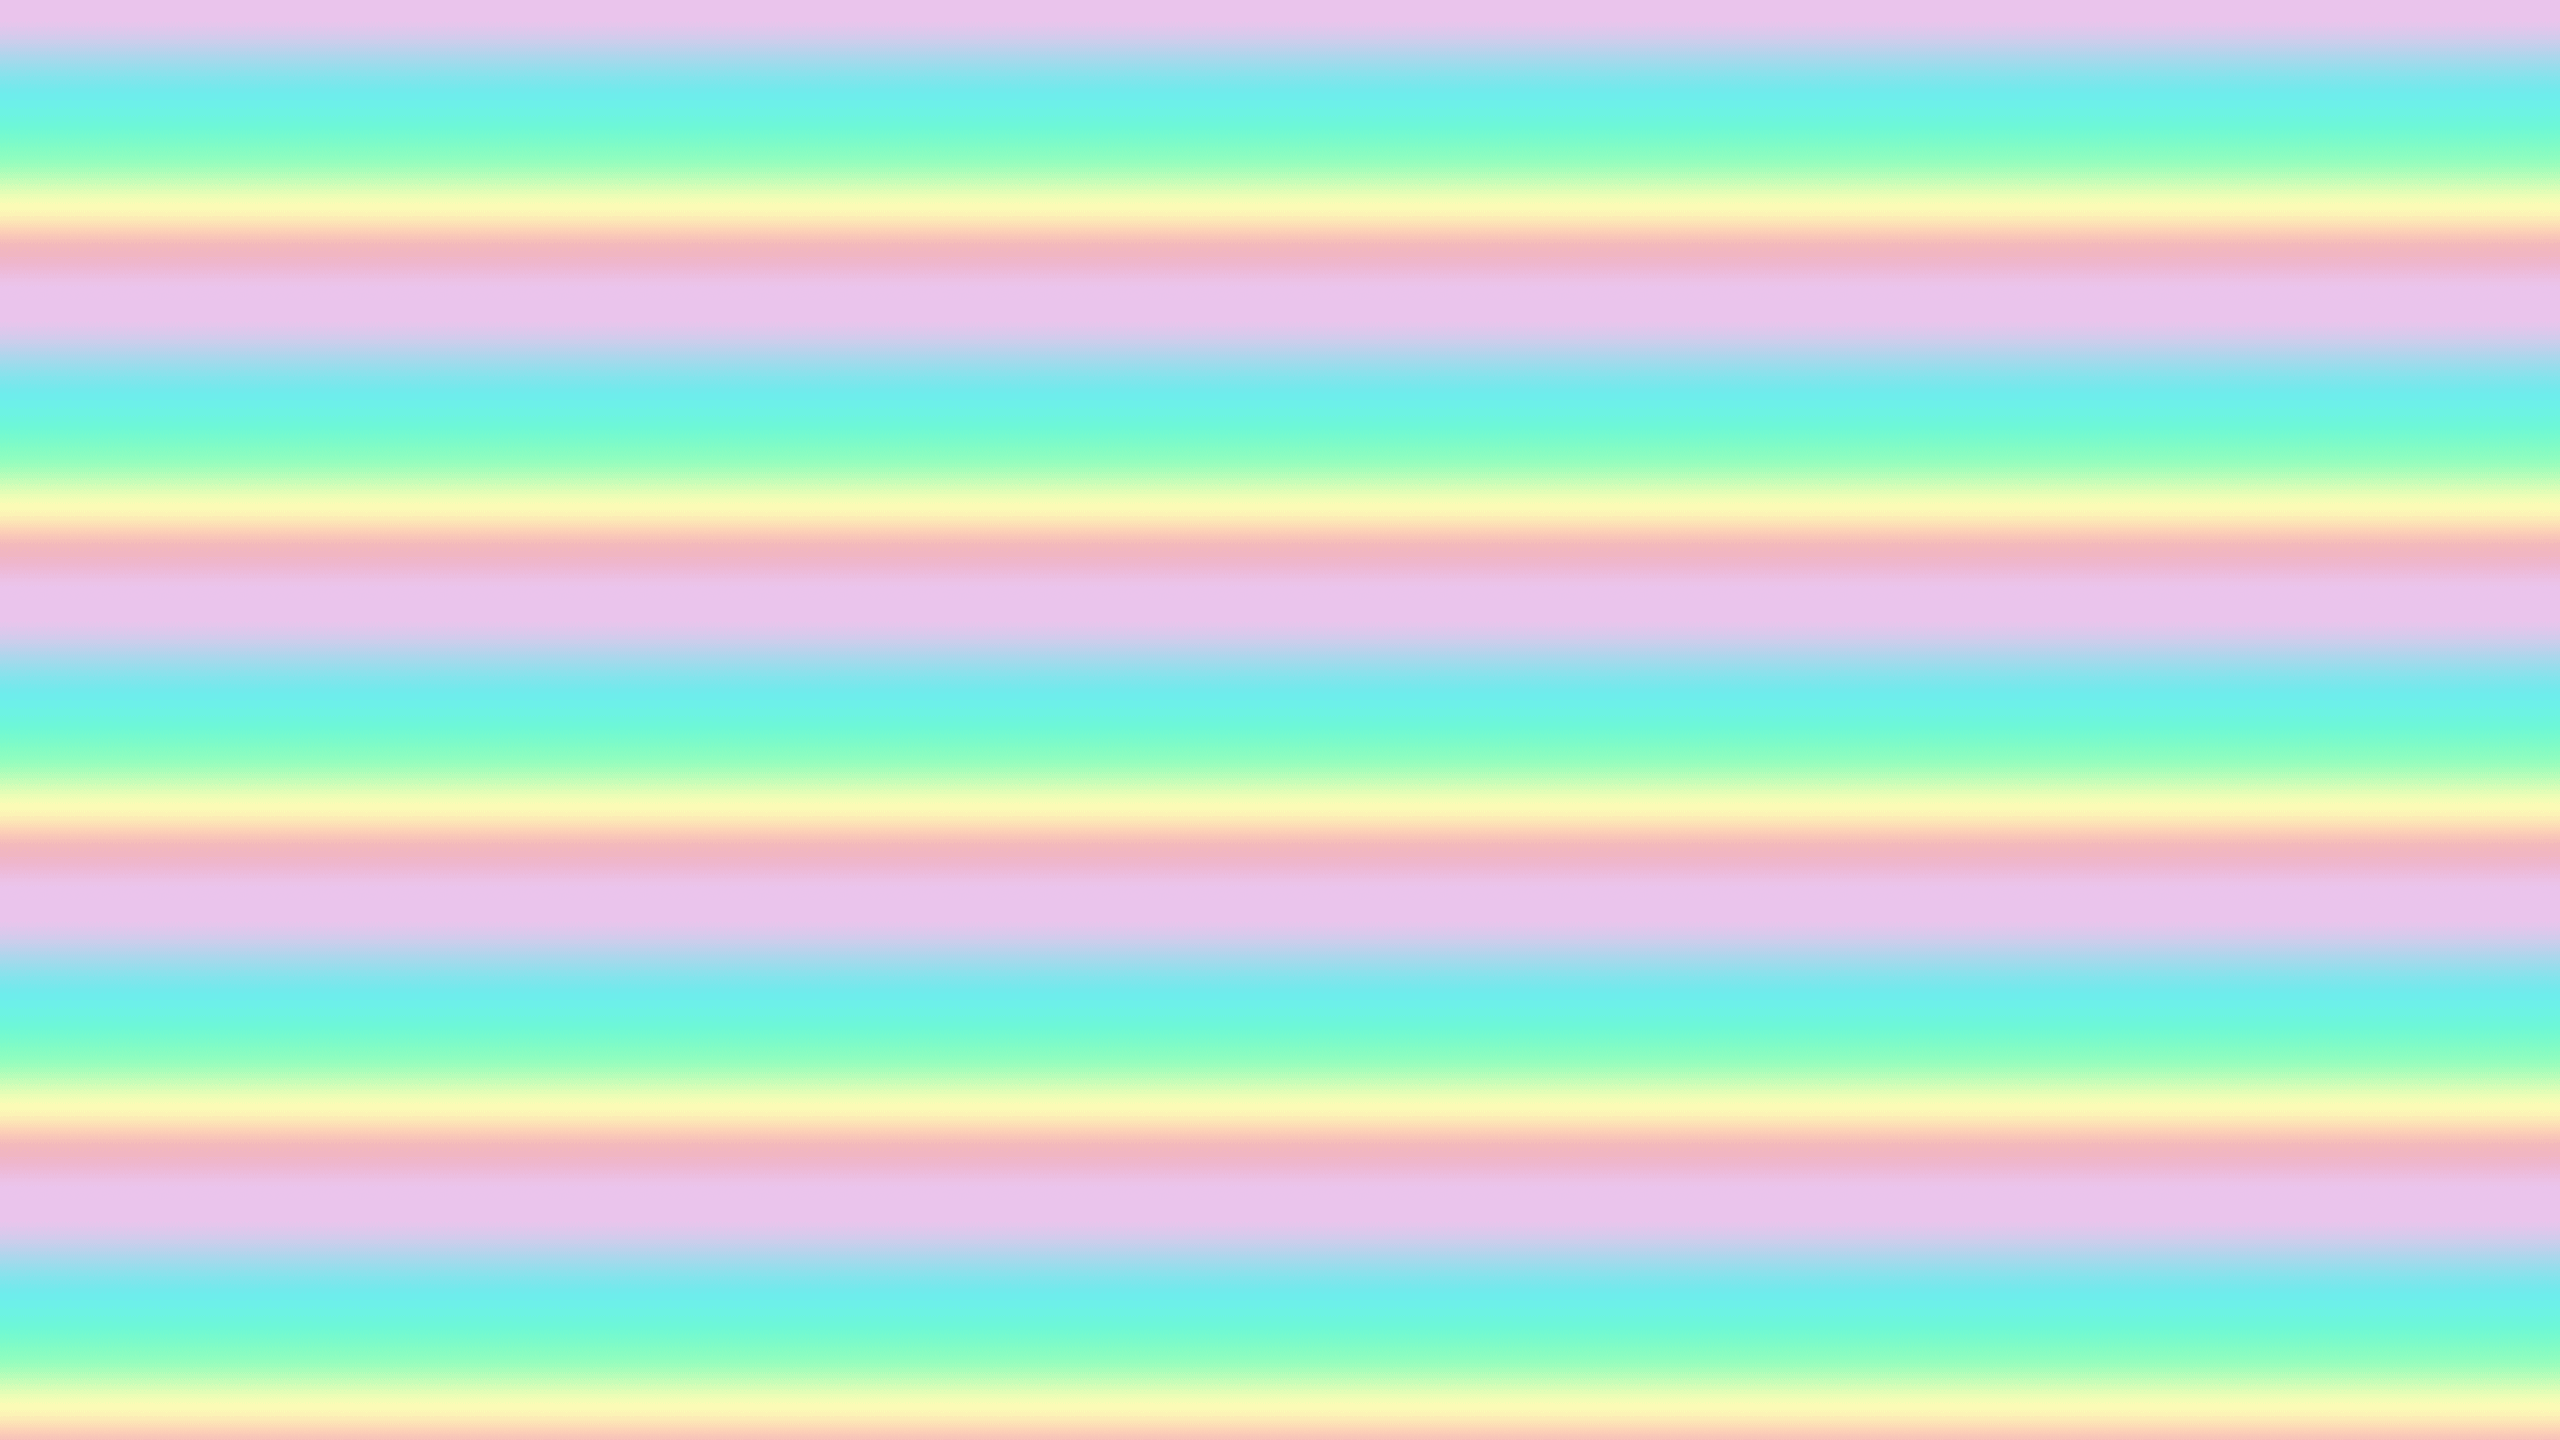 this Pastel Rainbow Desktop Wallpaper is easy Just save the wallpaper